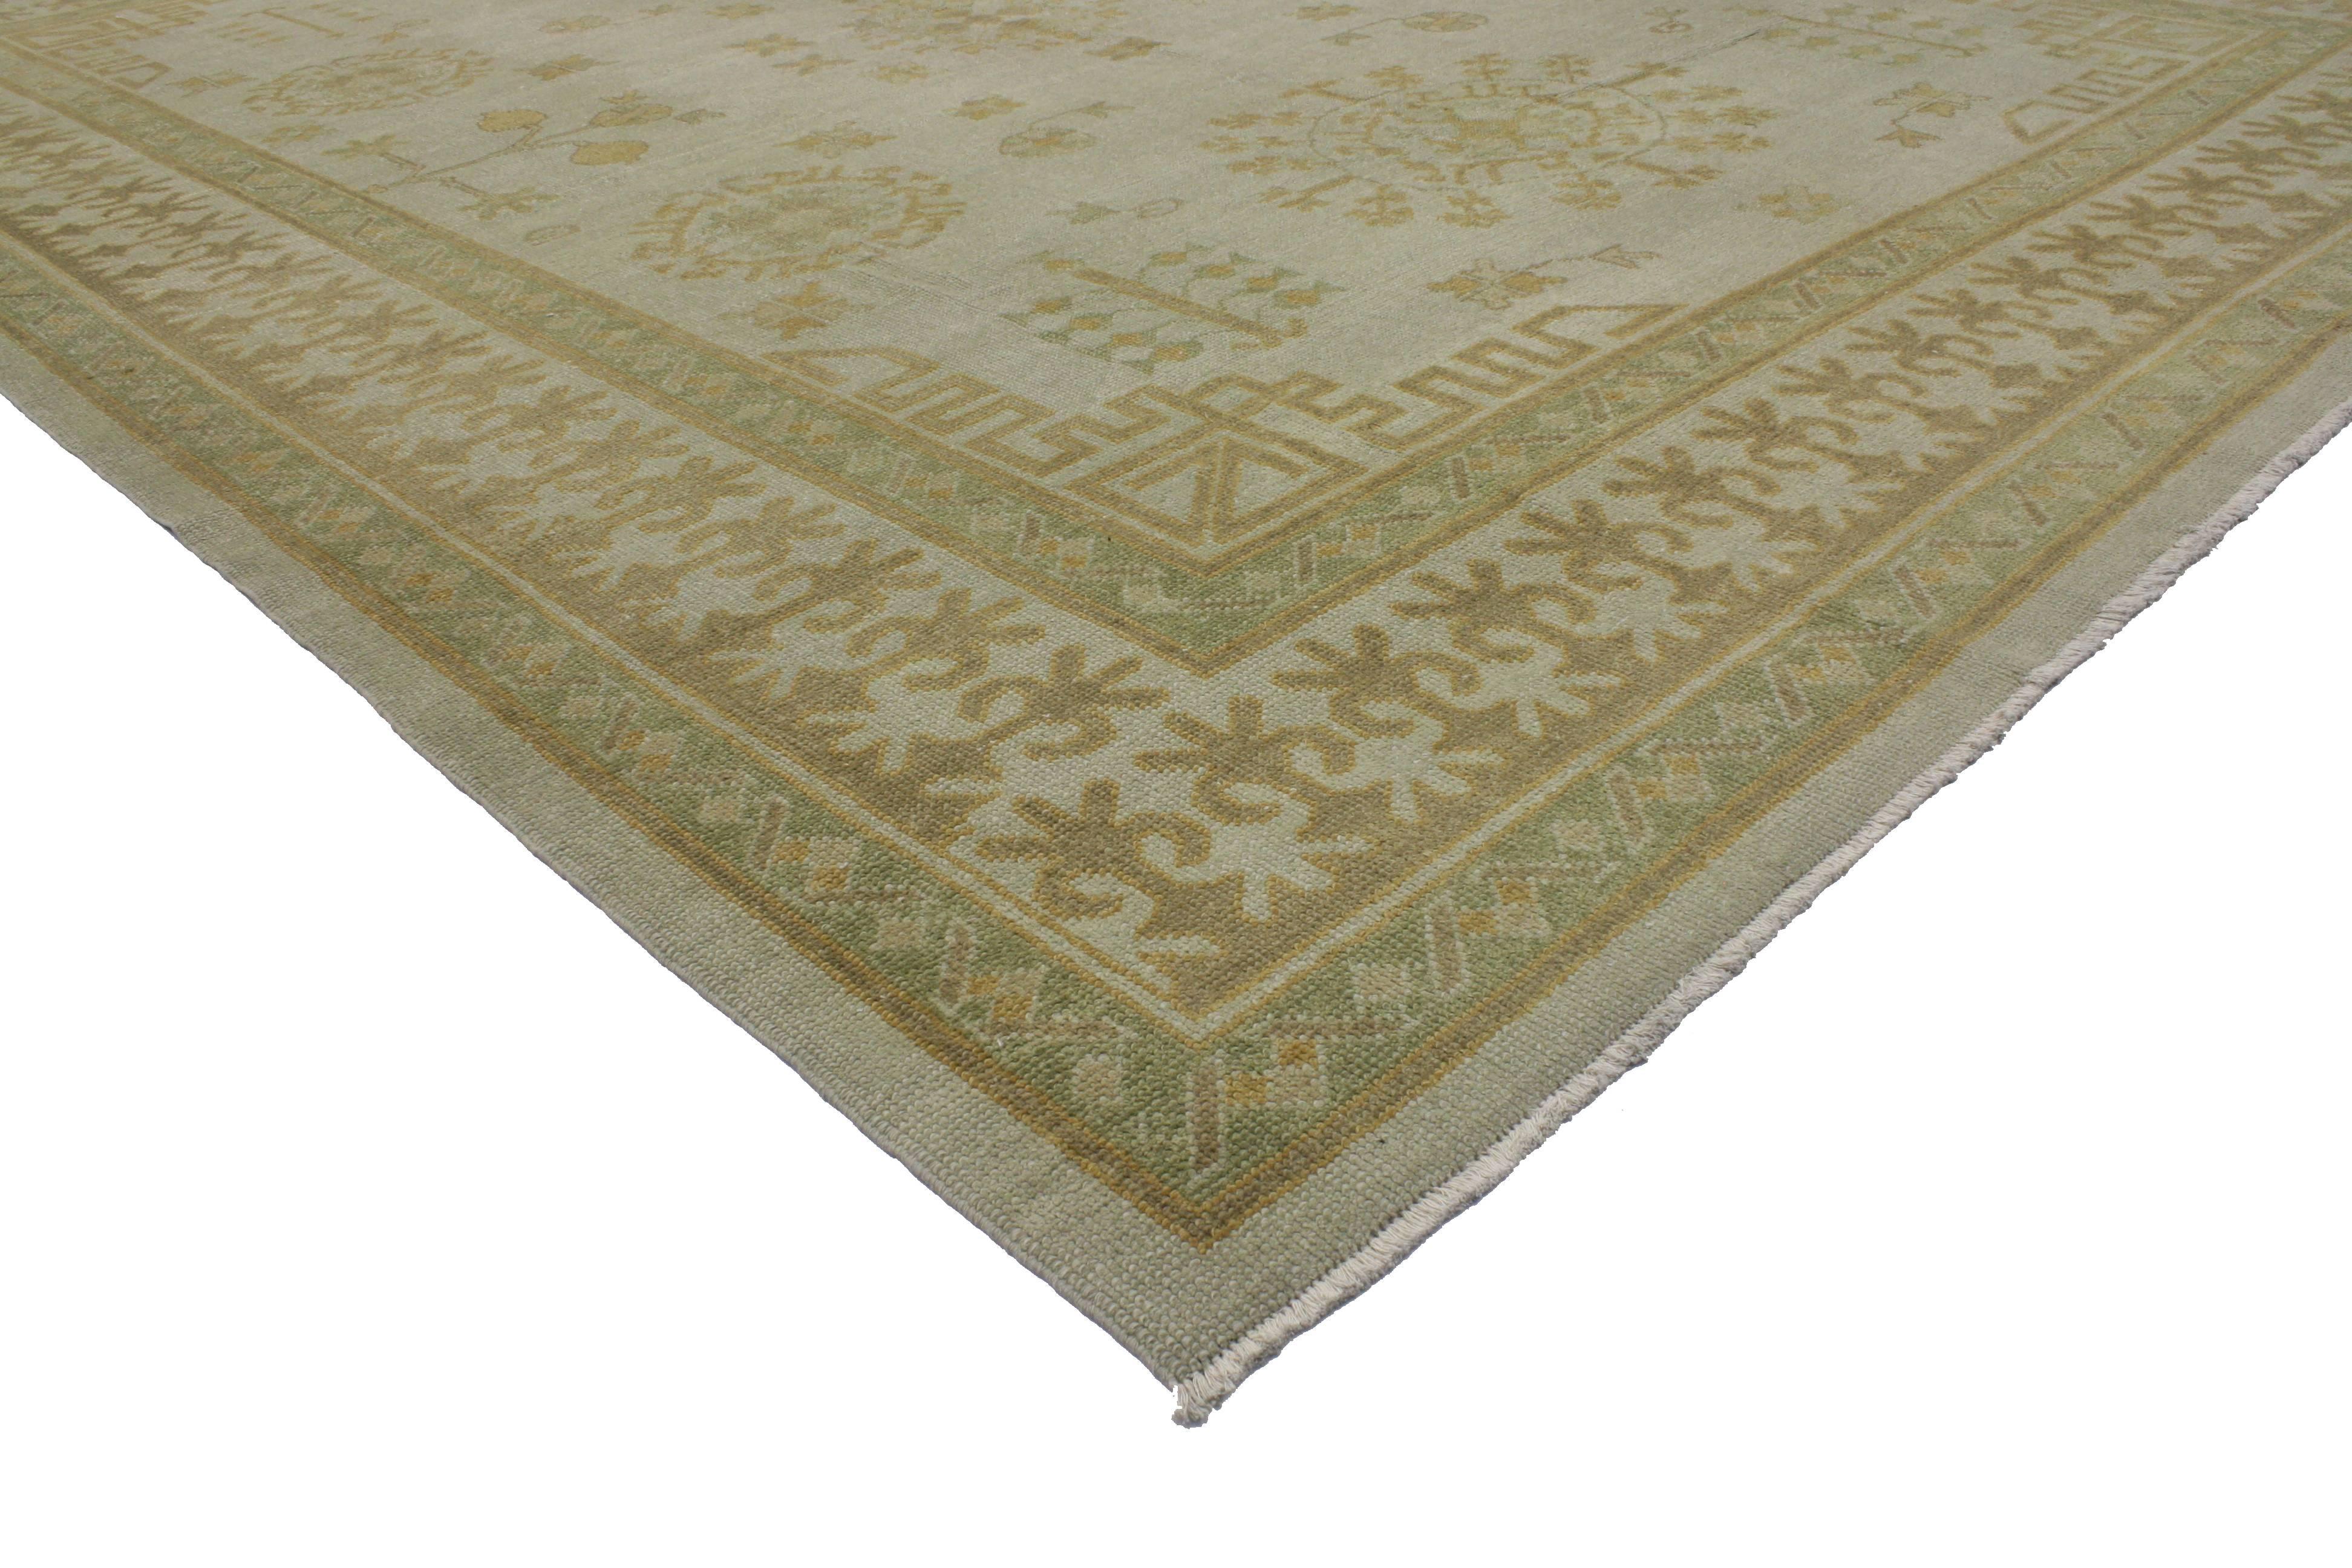 This modern Turkish Oushak rug features a transitional style and casual elegance. The meticulous details radiate throughout the well-balanced composition creating a compelling framework unfolding a beautiful patina. This Oushak rug possesses an